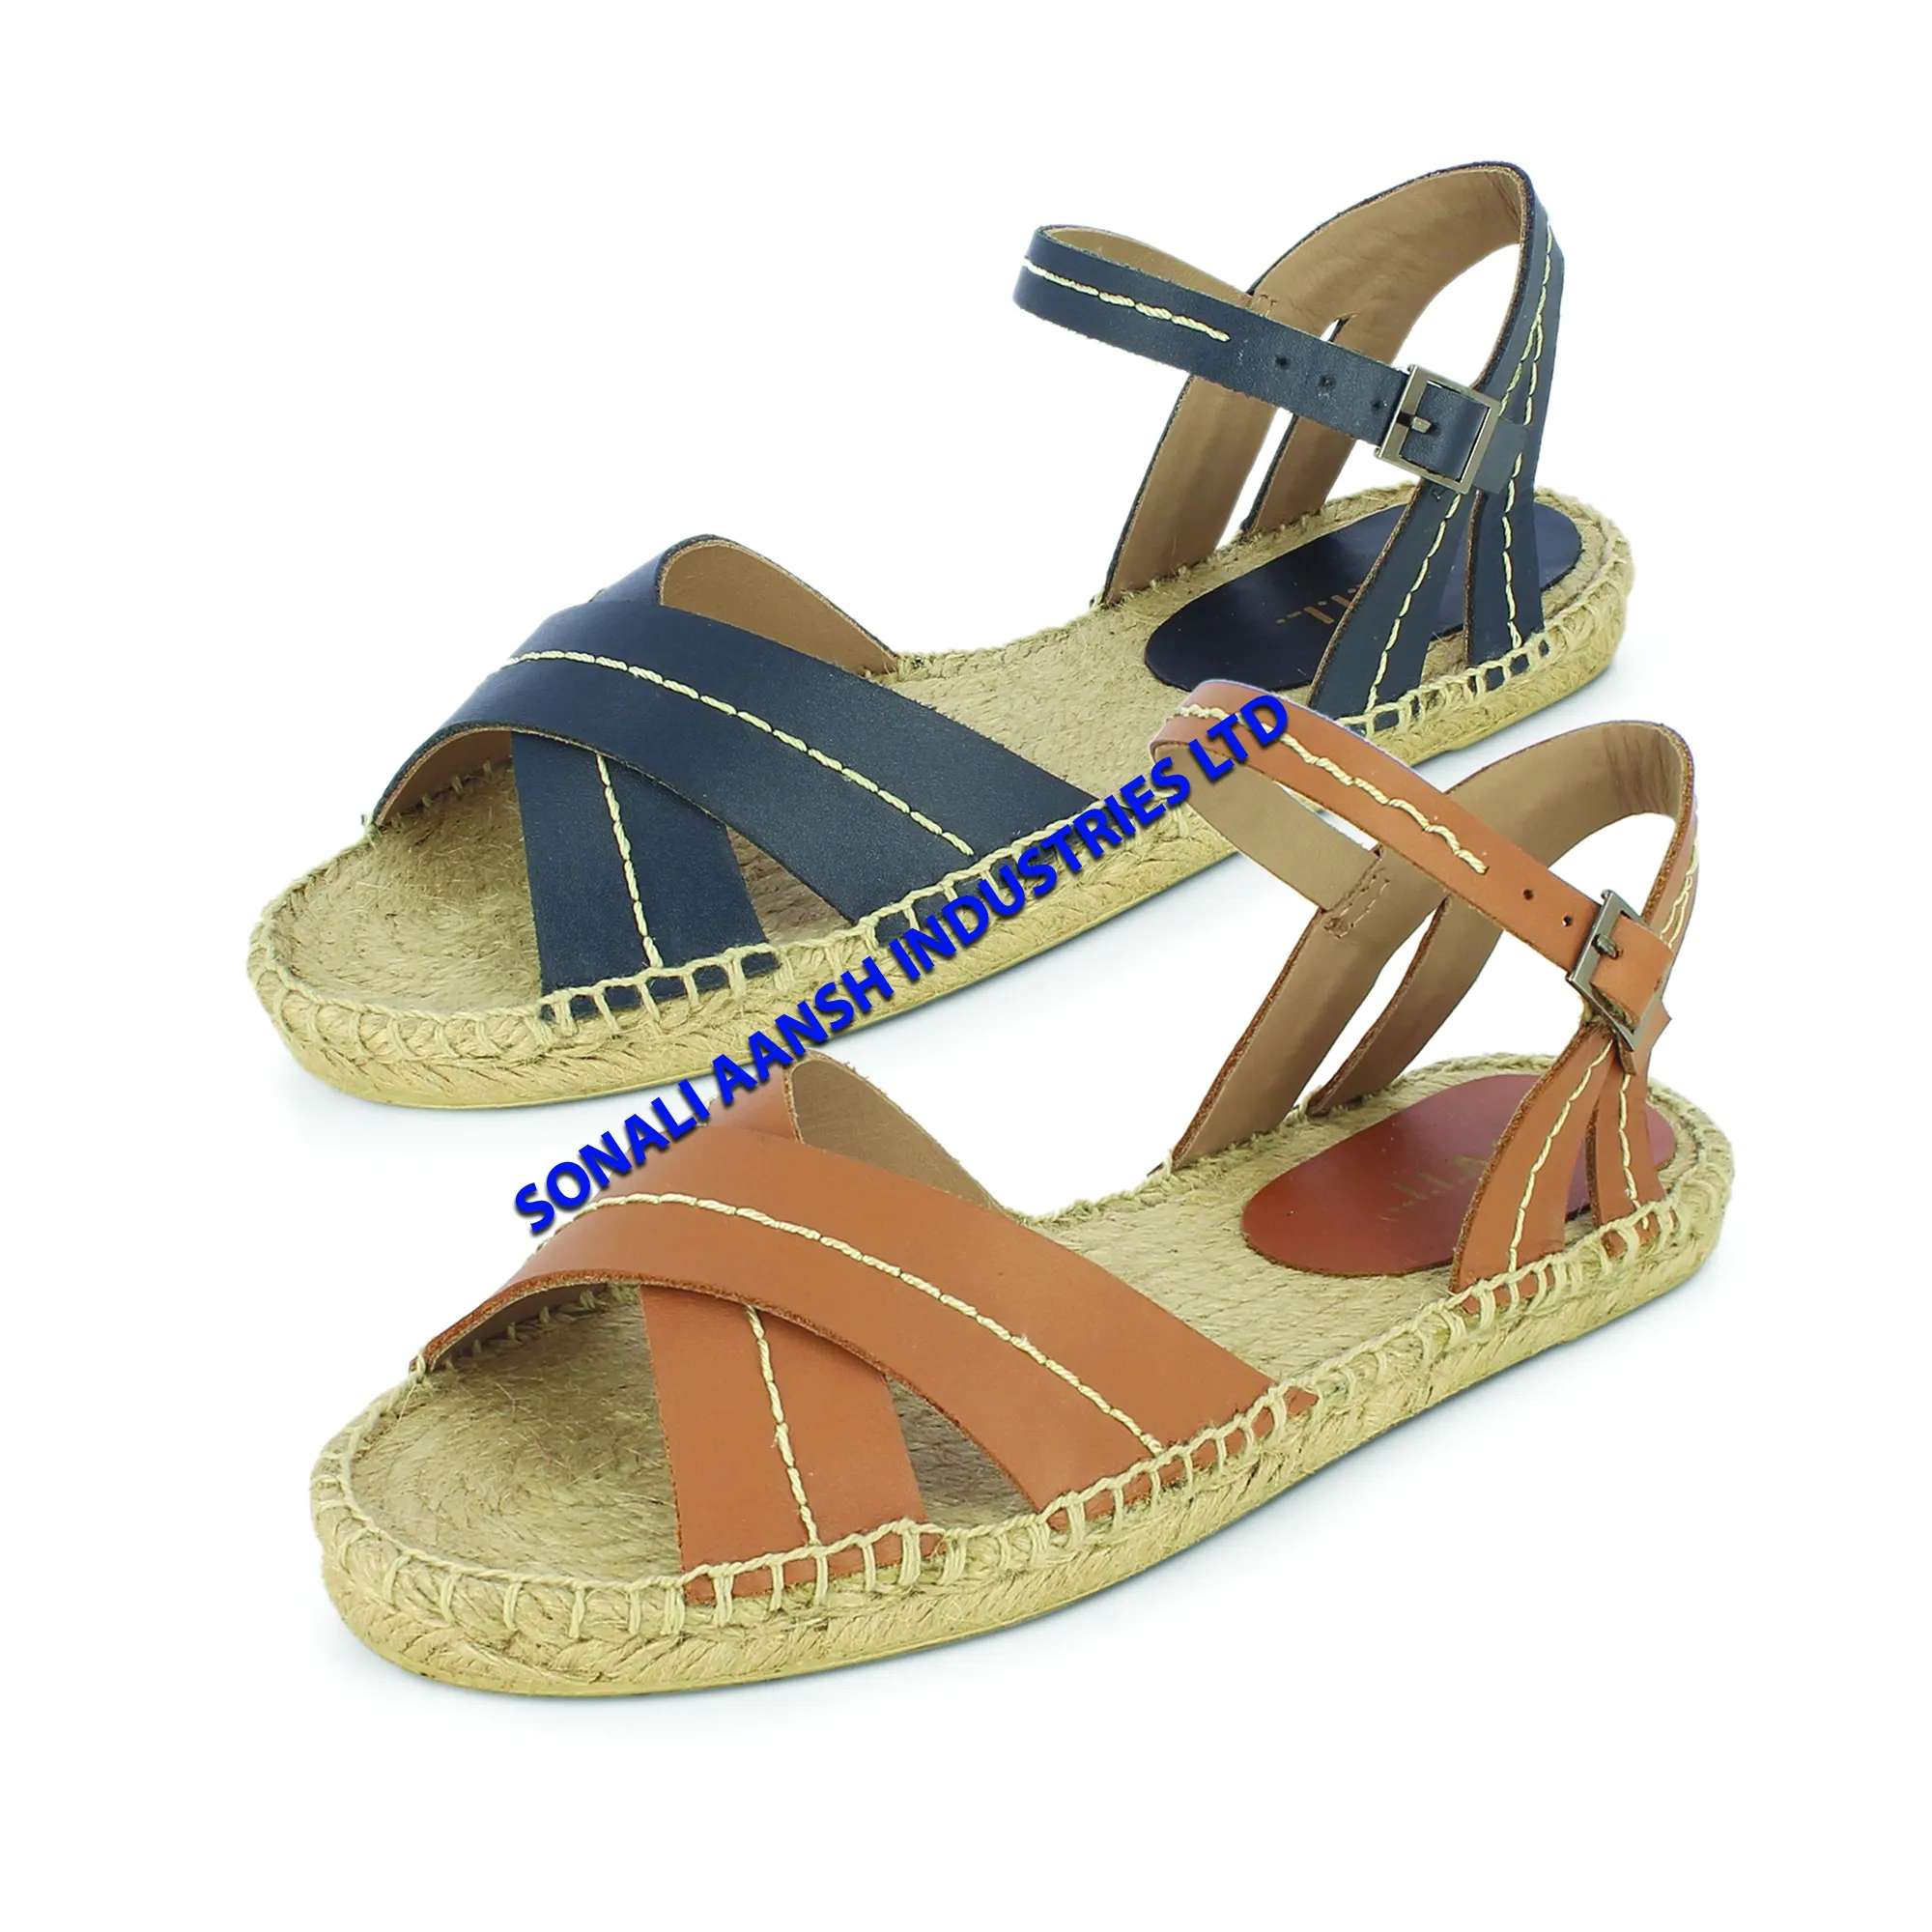 Hot Sale Cheap Price Flat Canvas Espadrilles Wholesale Jute Leather Woman Open Both Sandals Fashions For Womens From Bangladesh